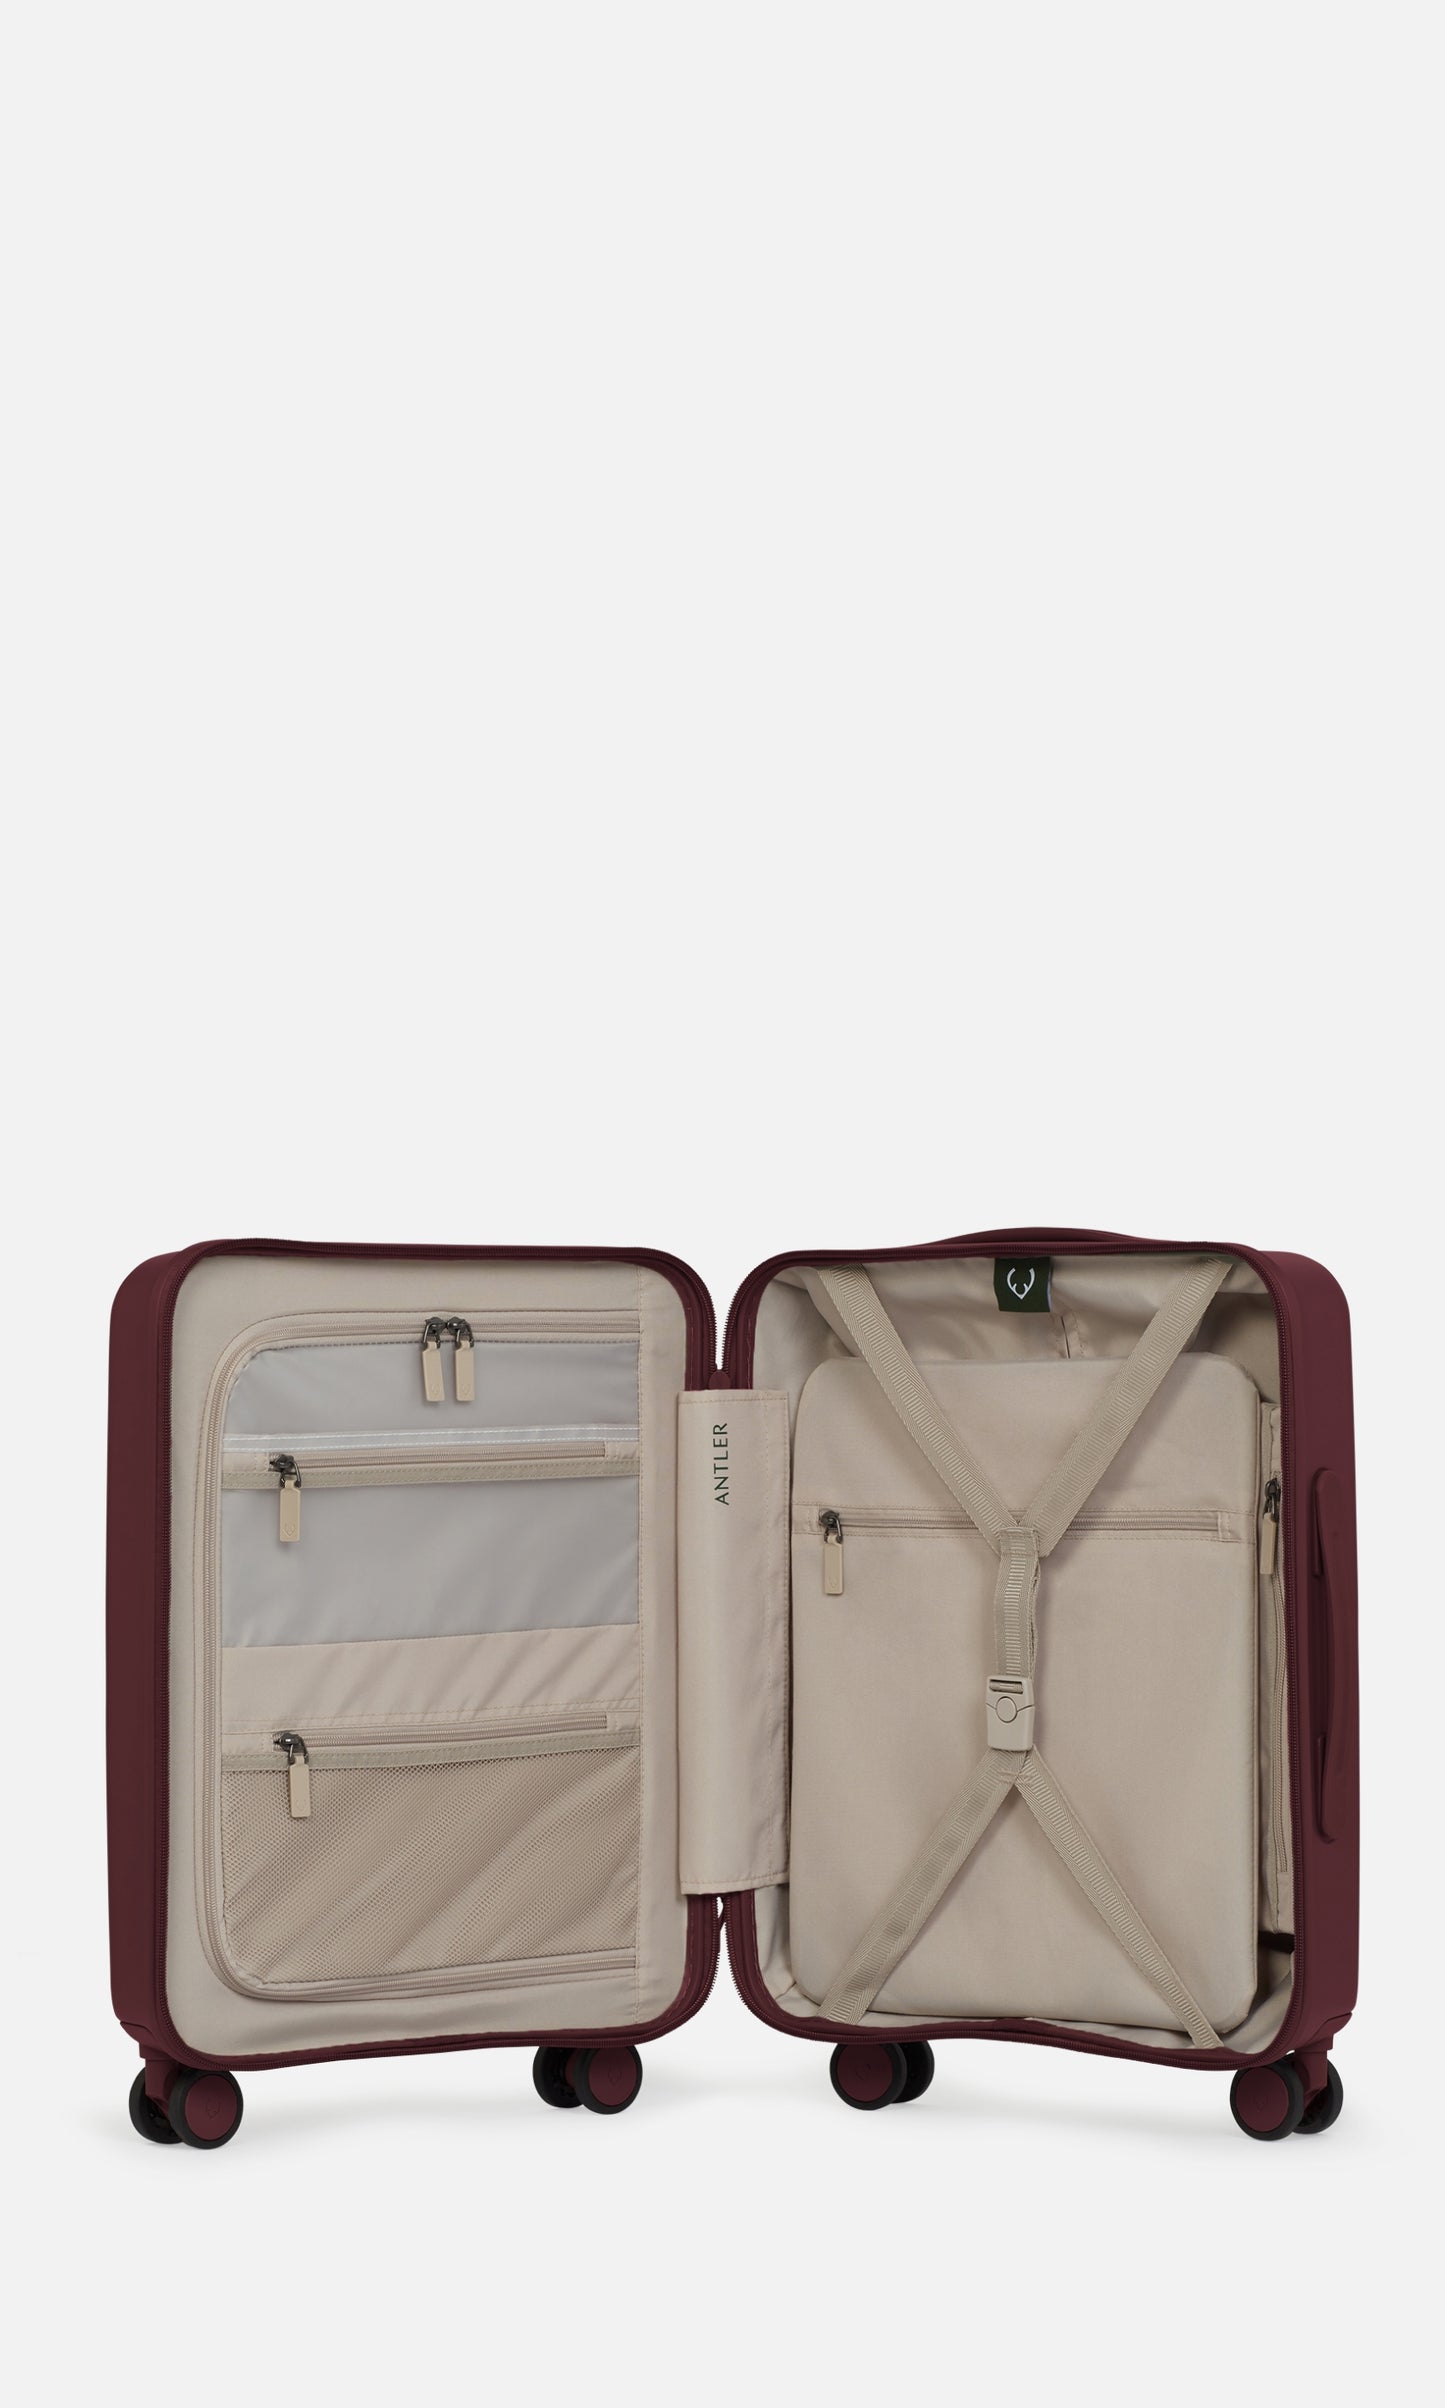 Stamford 2.0 Carry-On in Berry Red